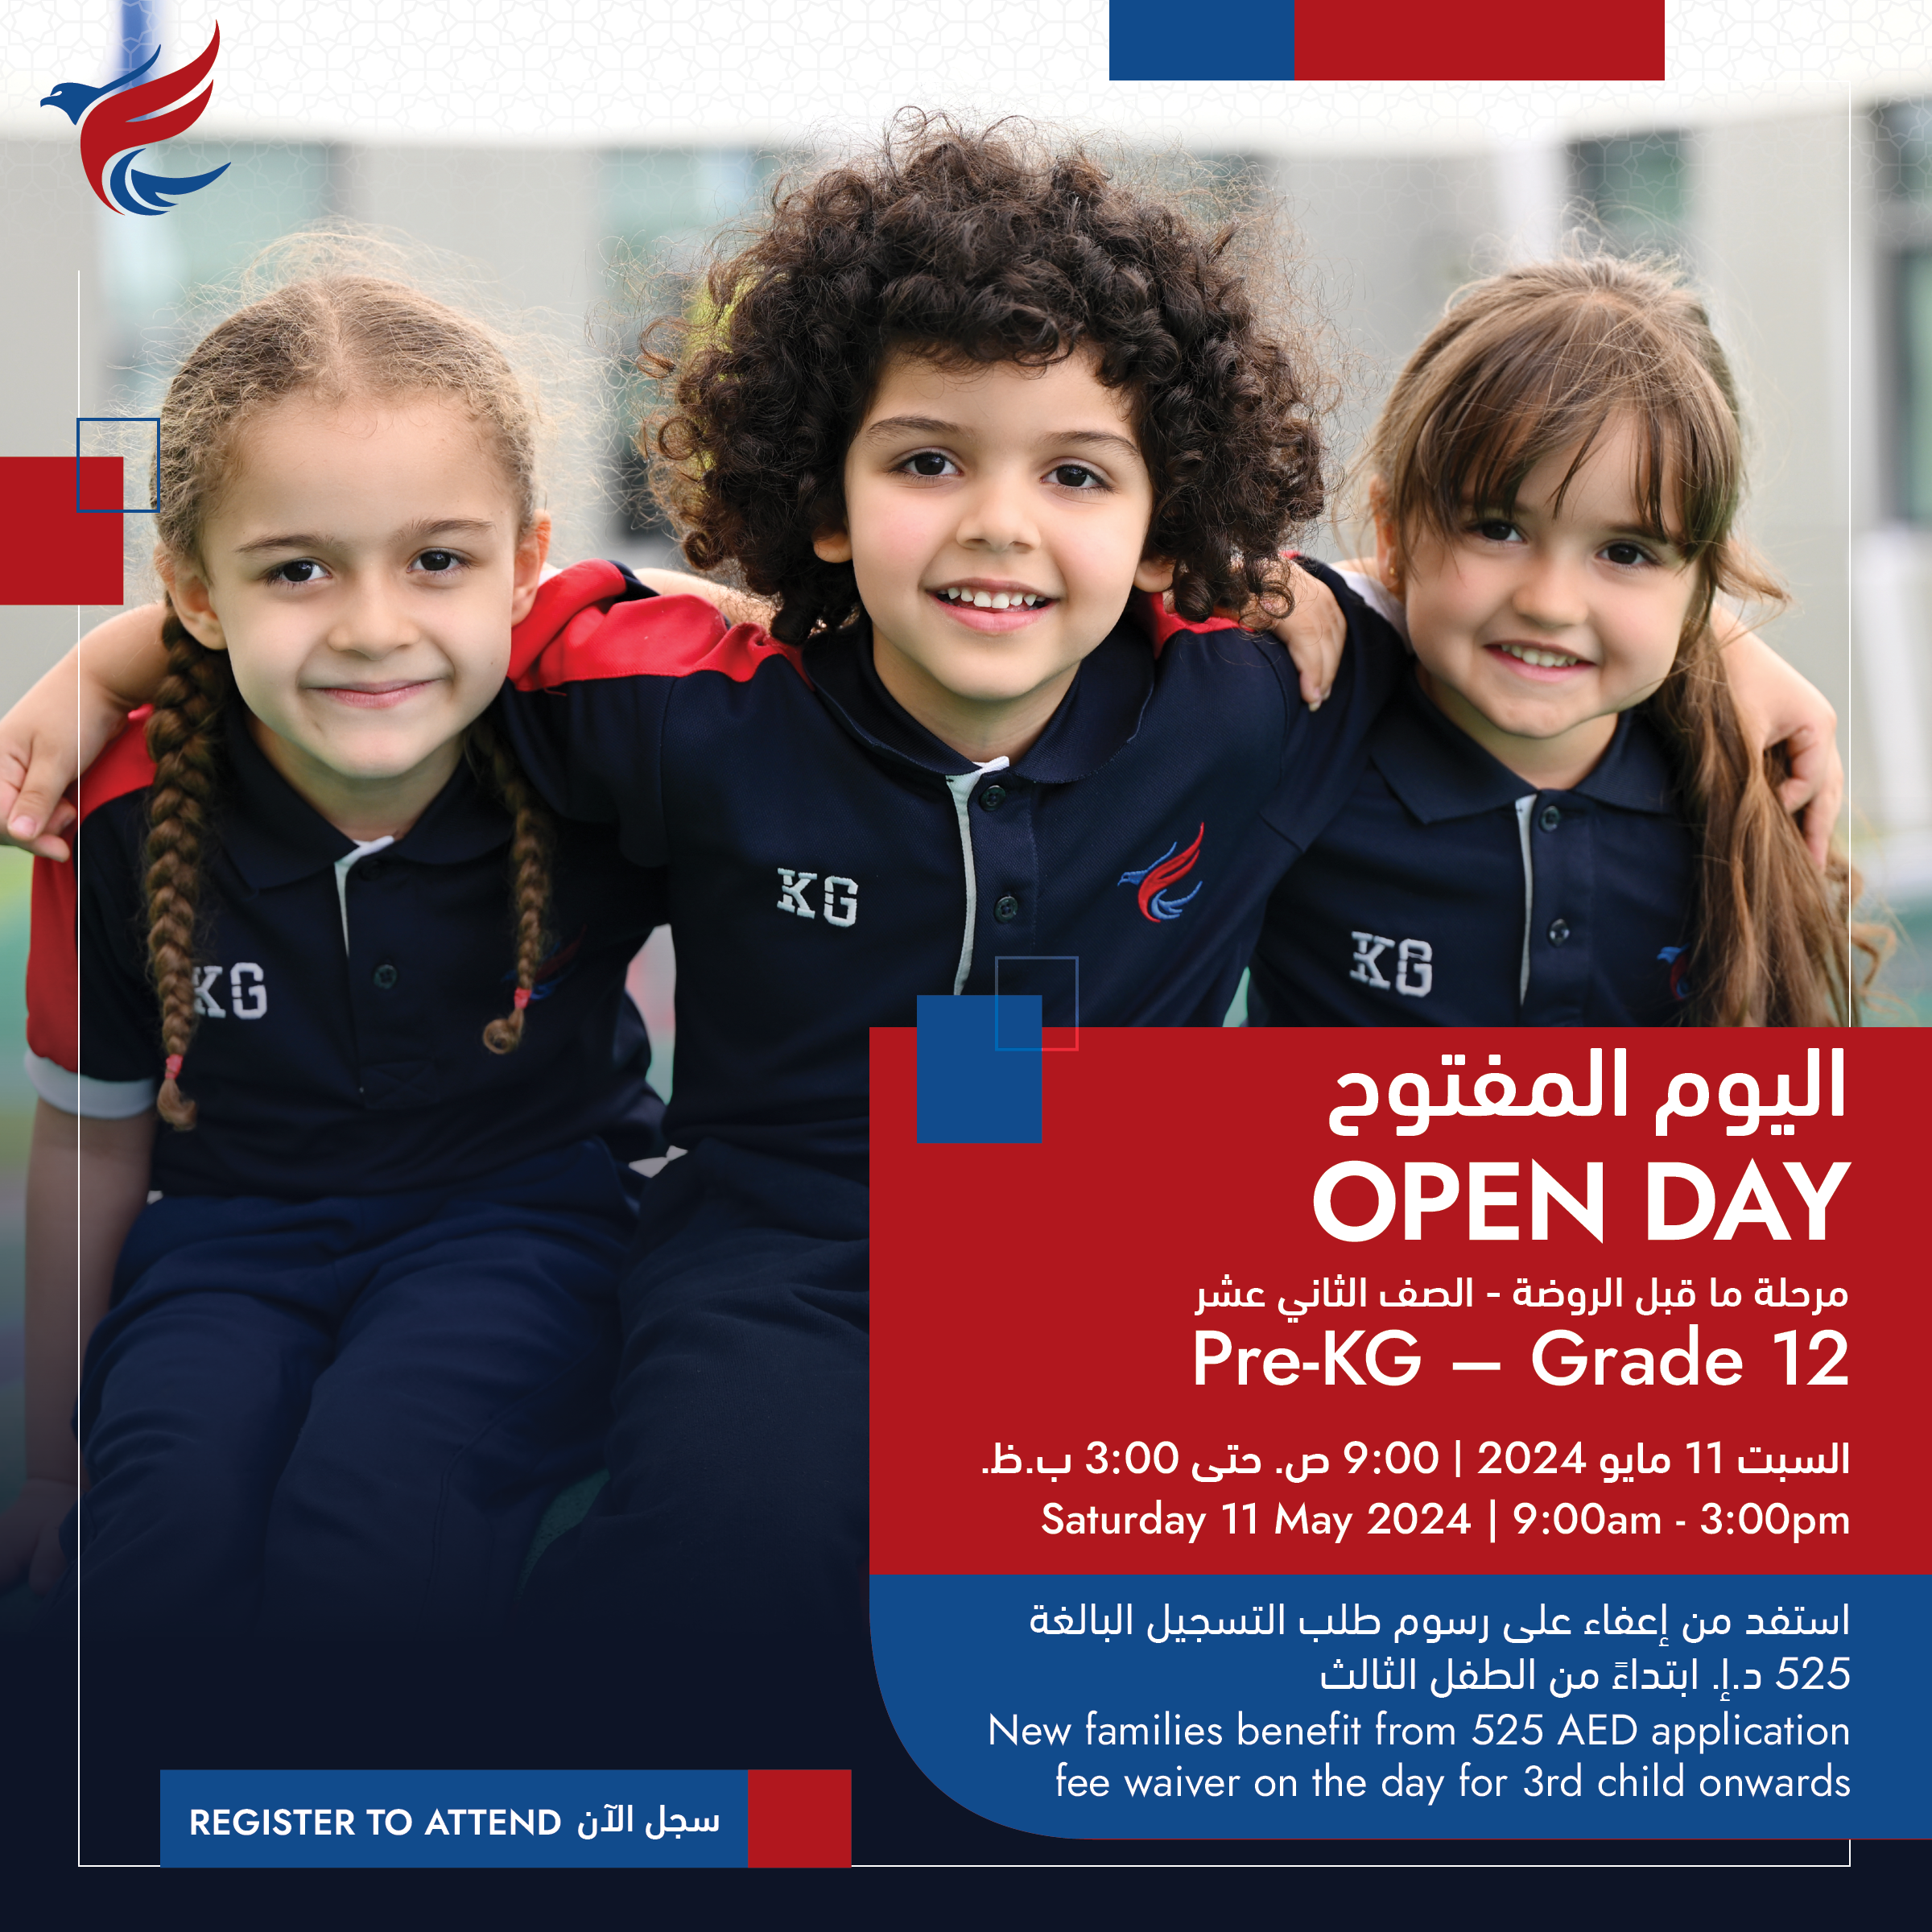 Open Day